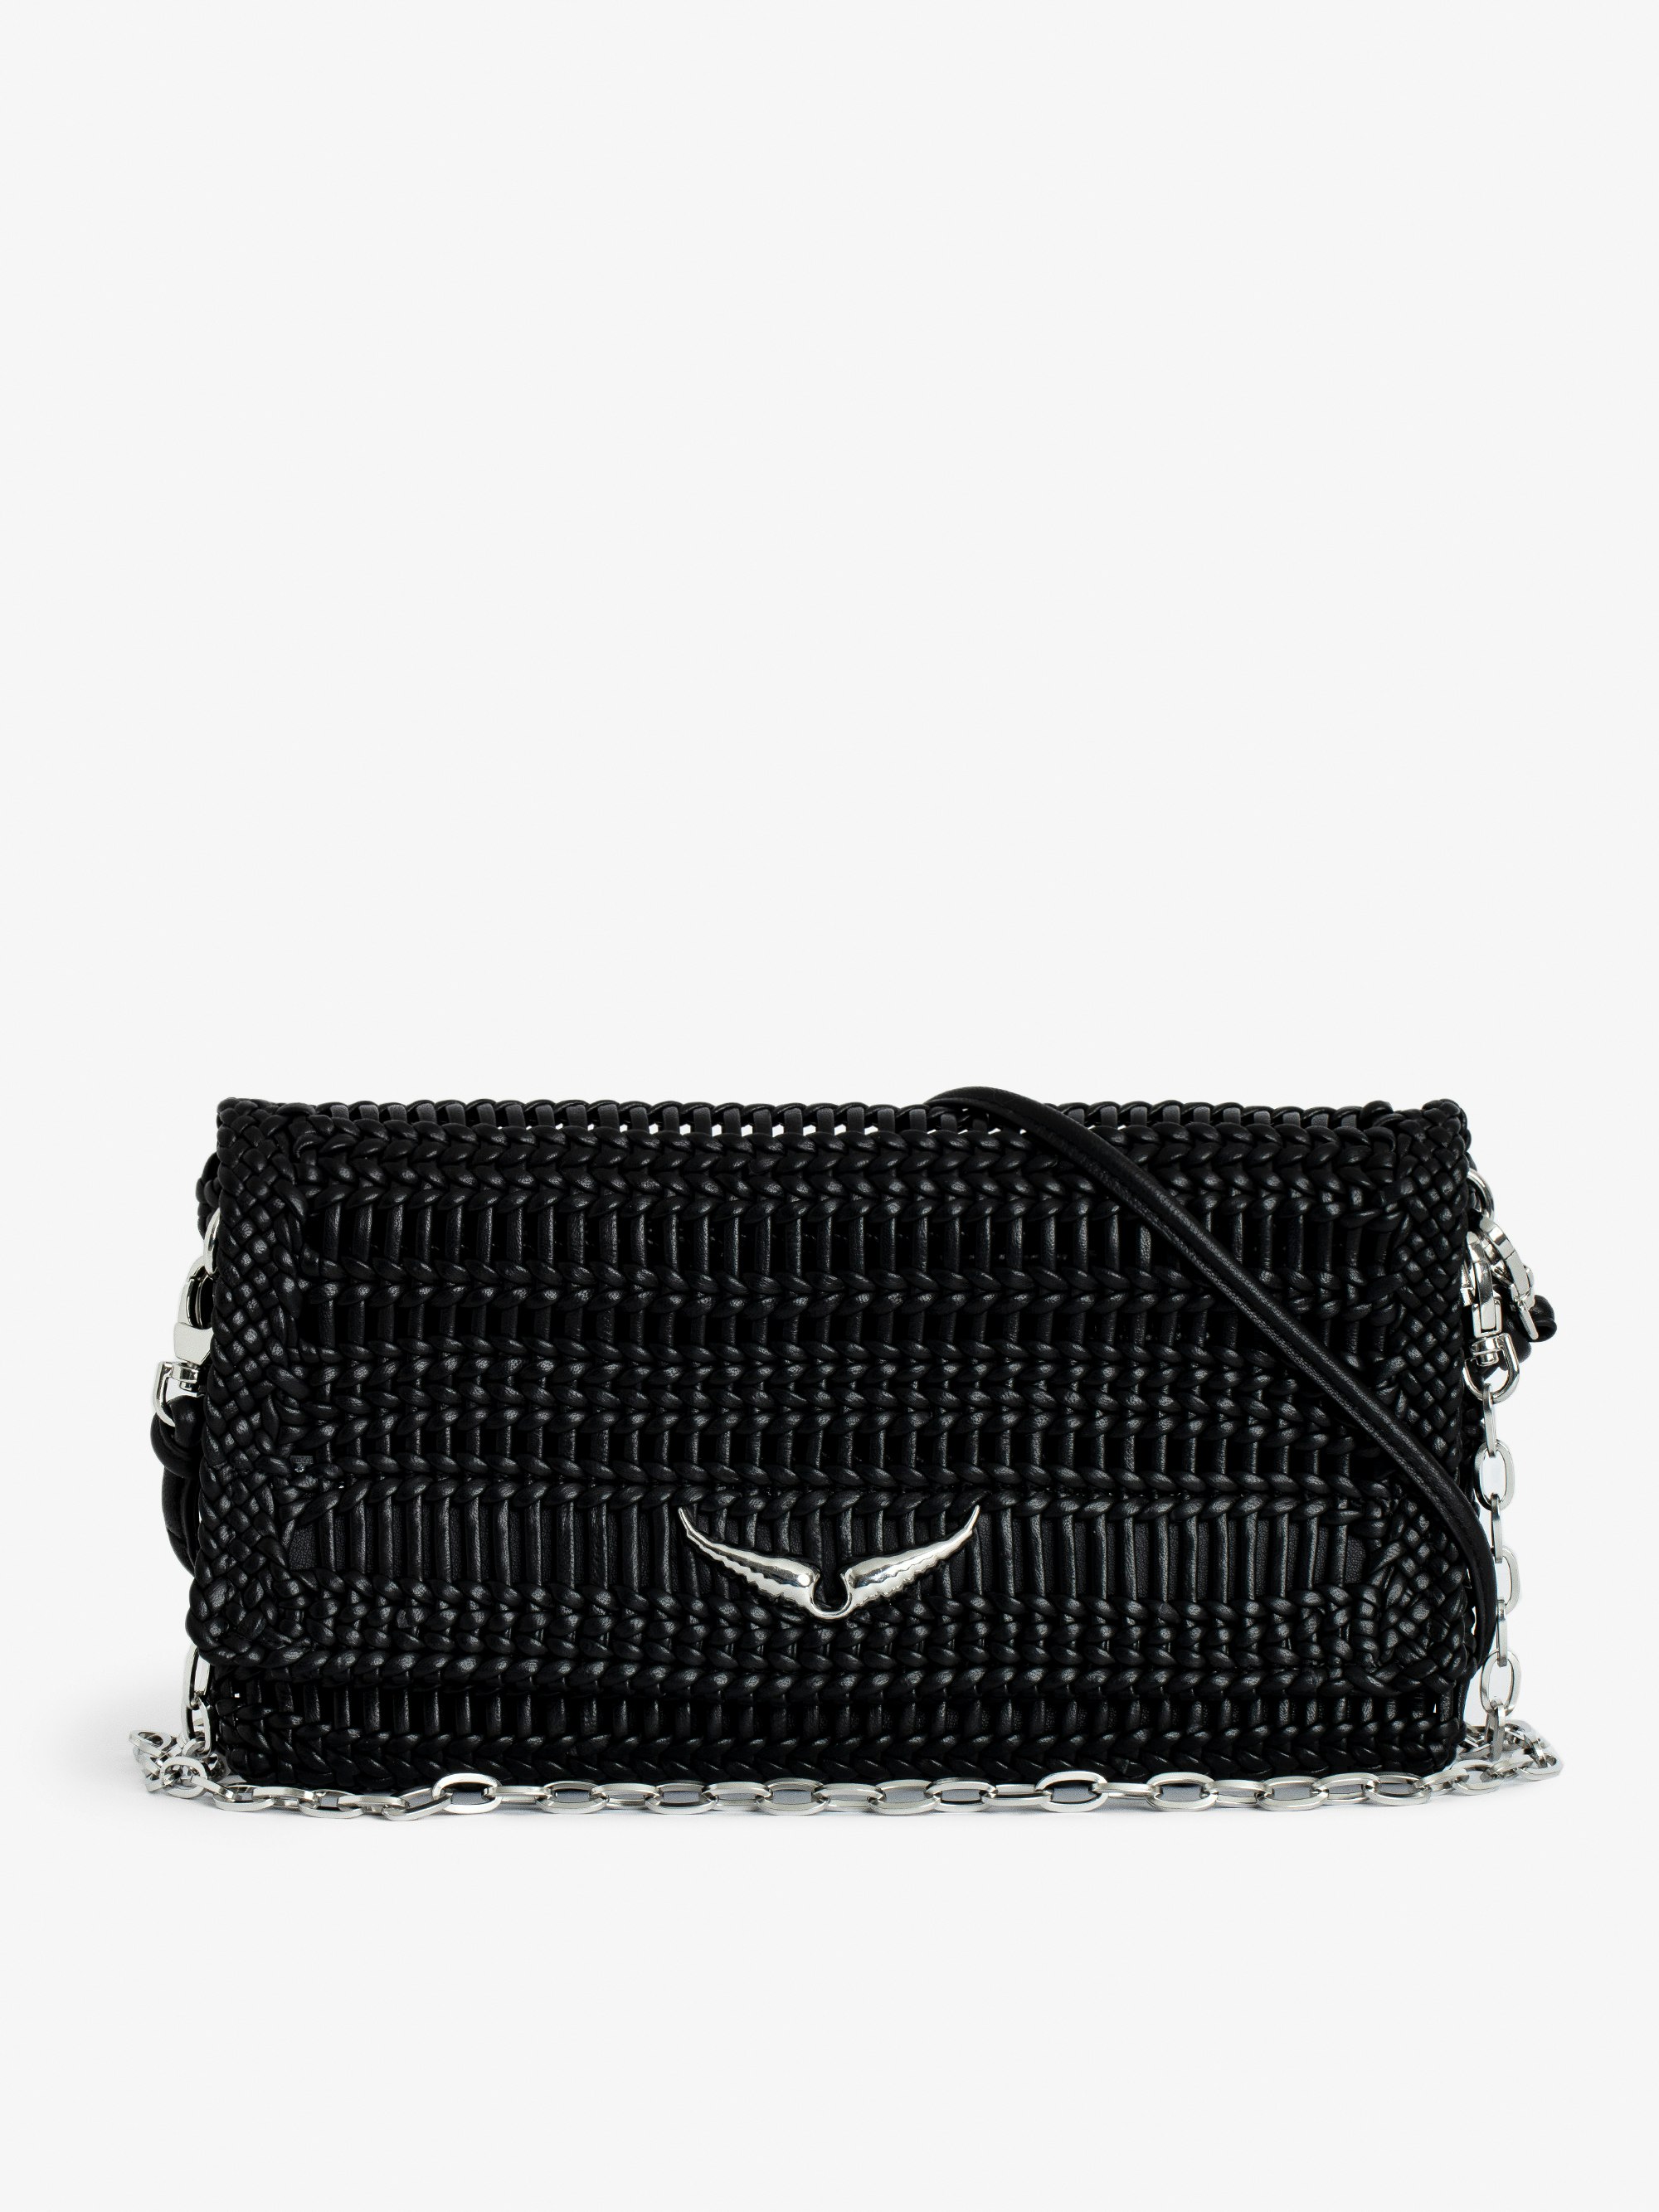 Rock Eternal Clutch - Women’s black braided leather clutch with tied shoulder strap, chain and wings.